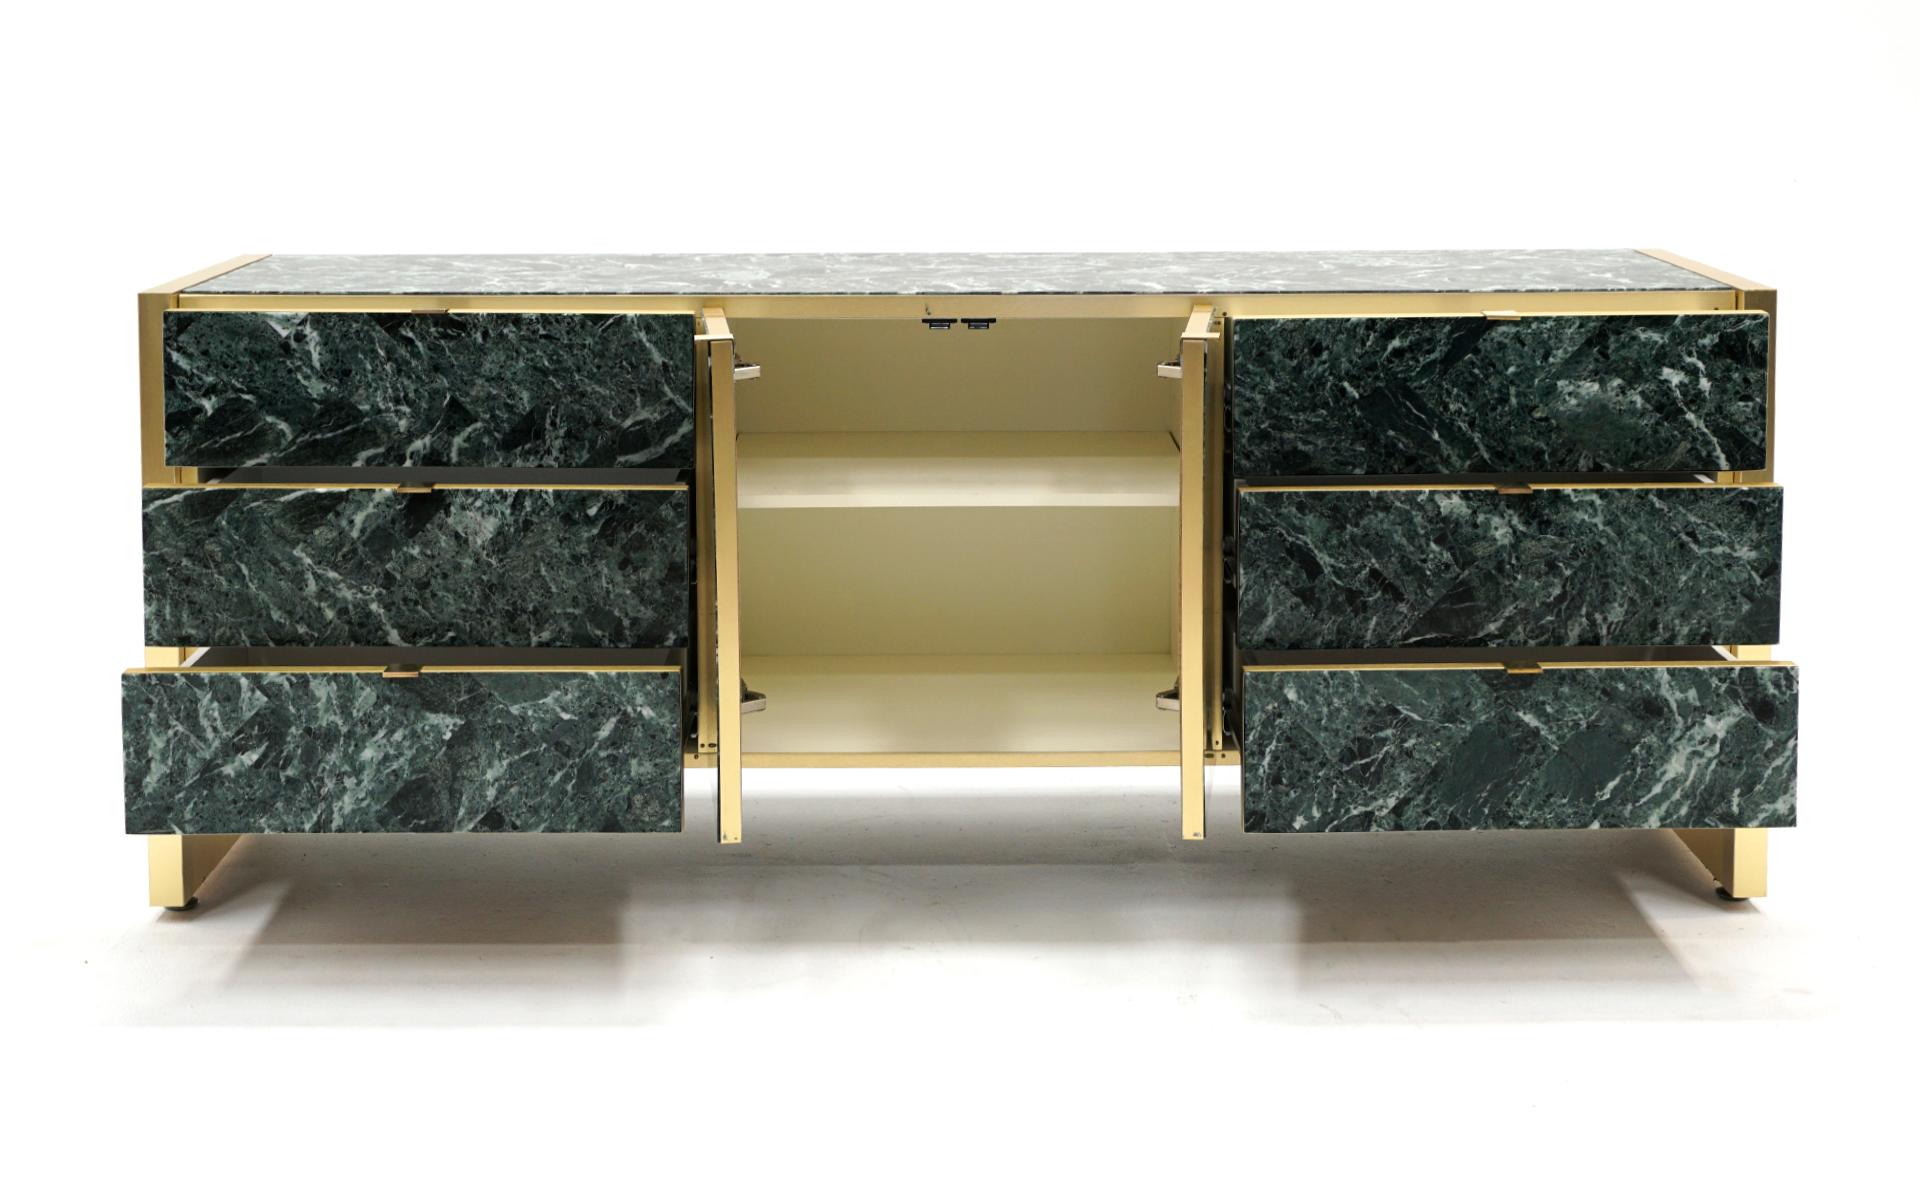 American Ello Storage Cabinet, Credenza, Dresser in Tessellated Green Marble and Brass